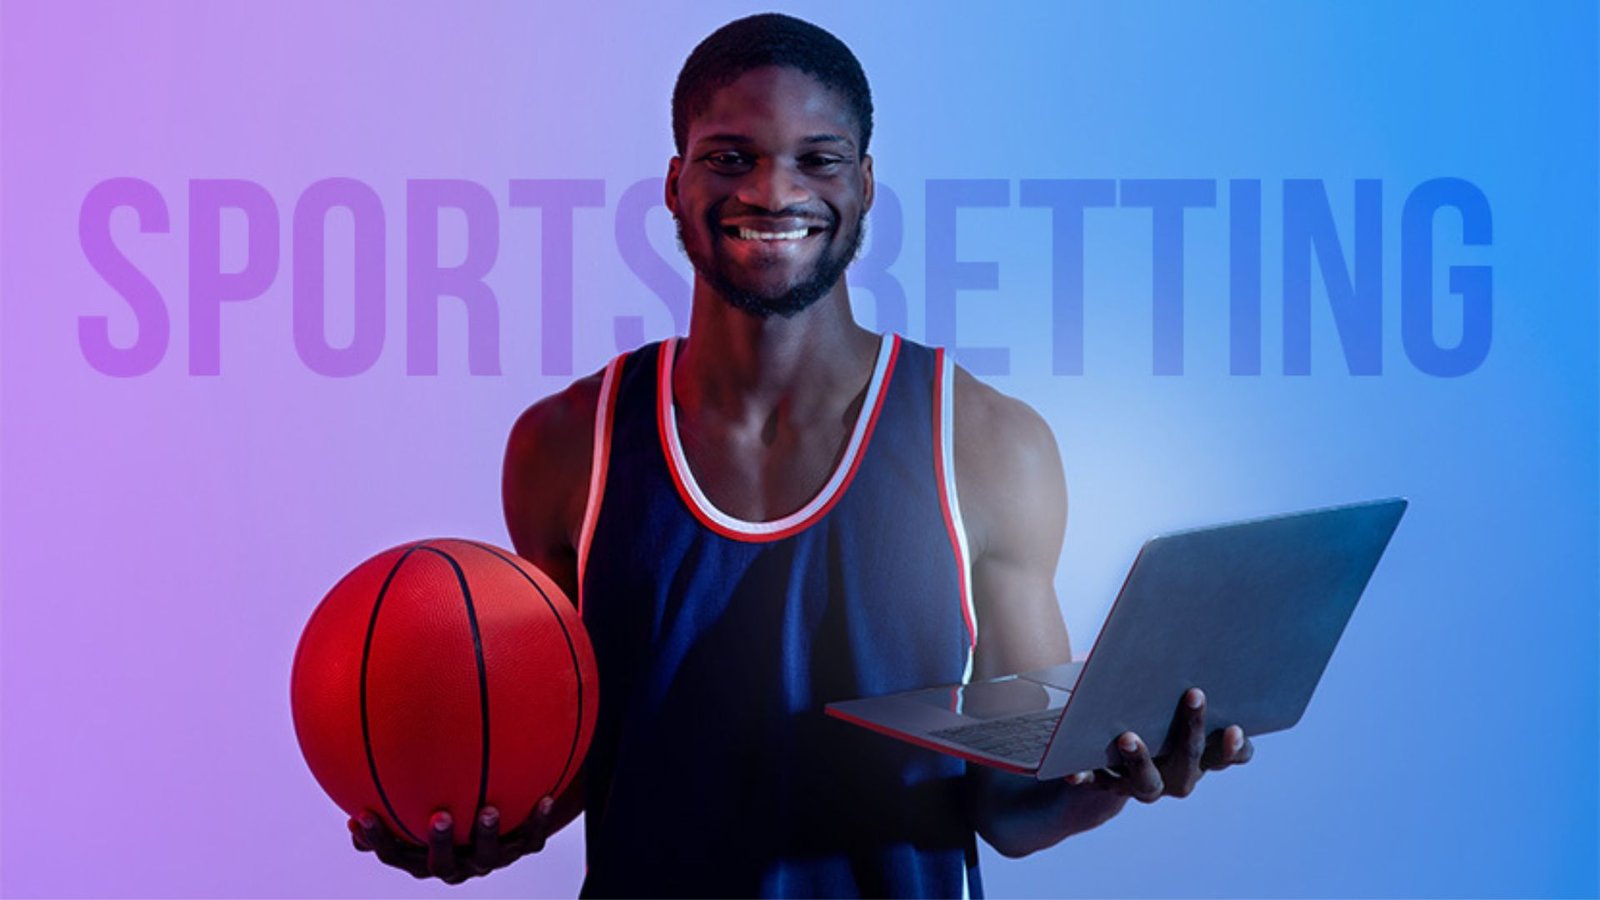 A Man Holding a Laptop and a Basket Ball